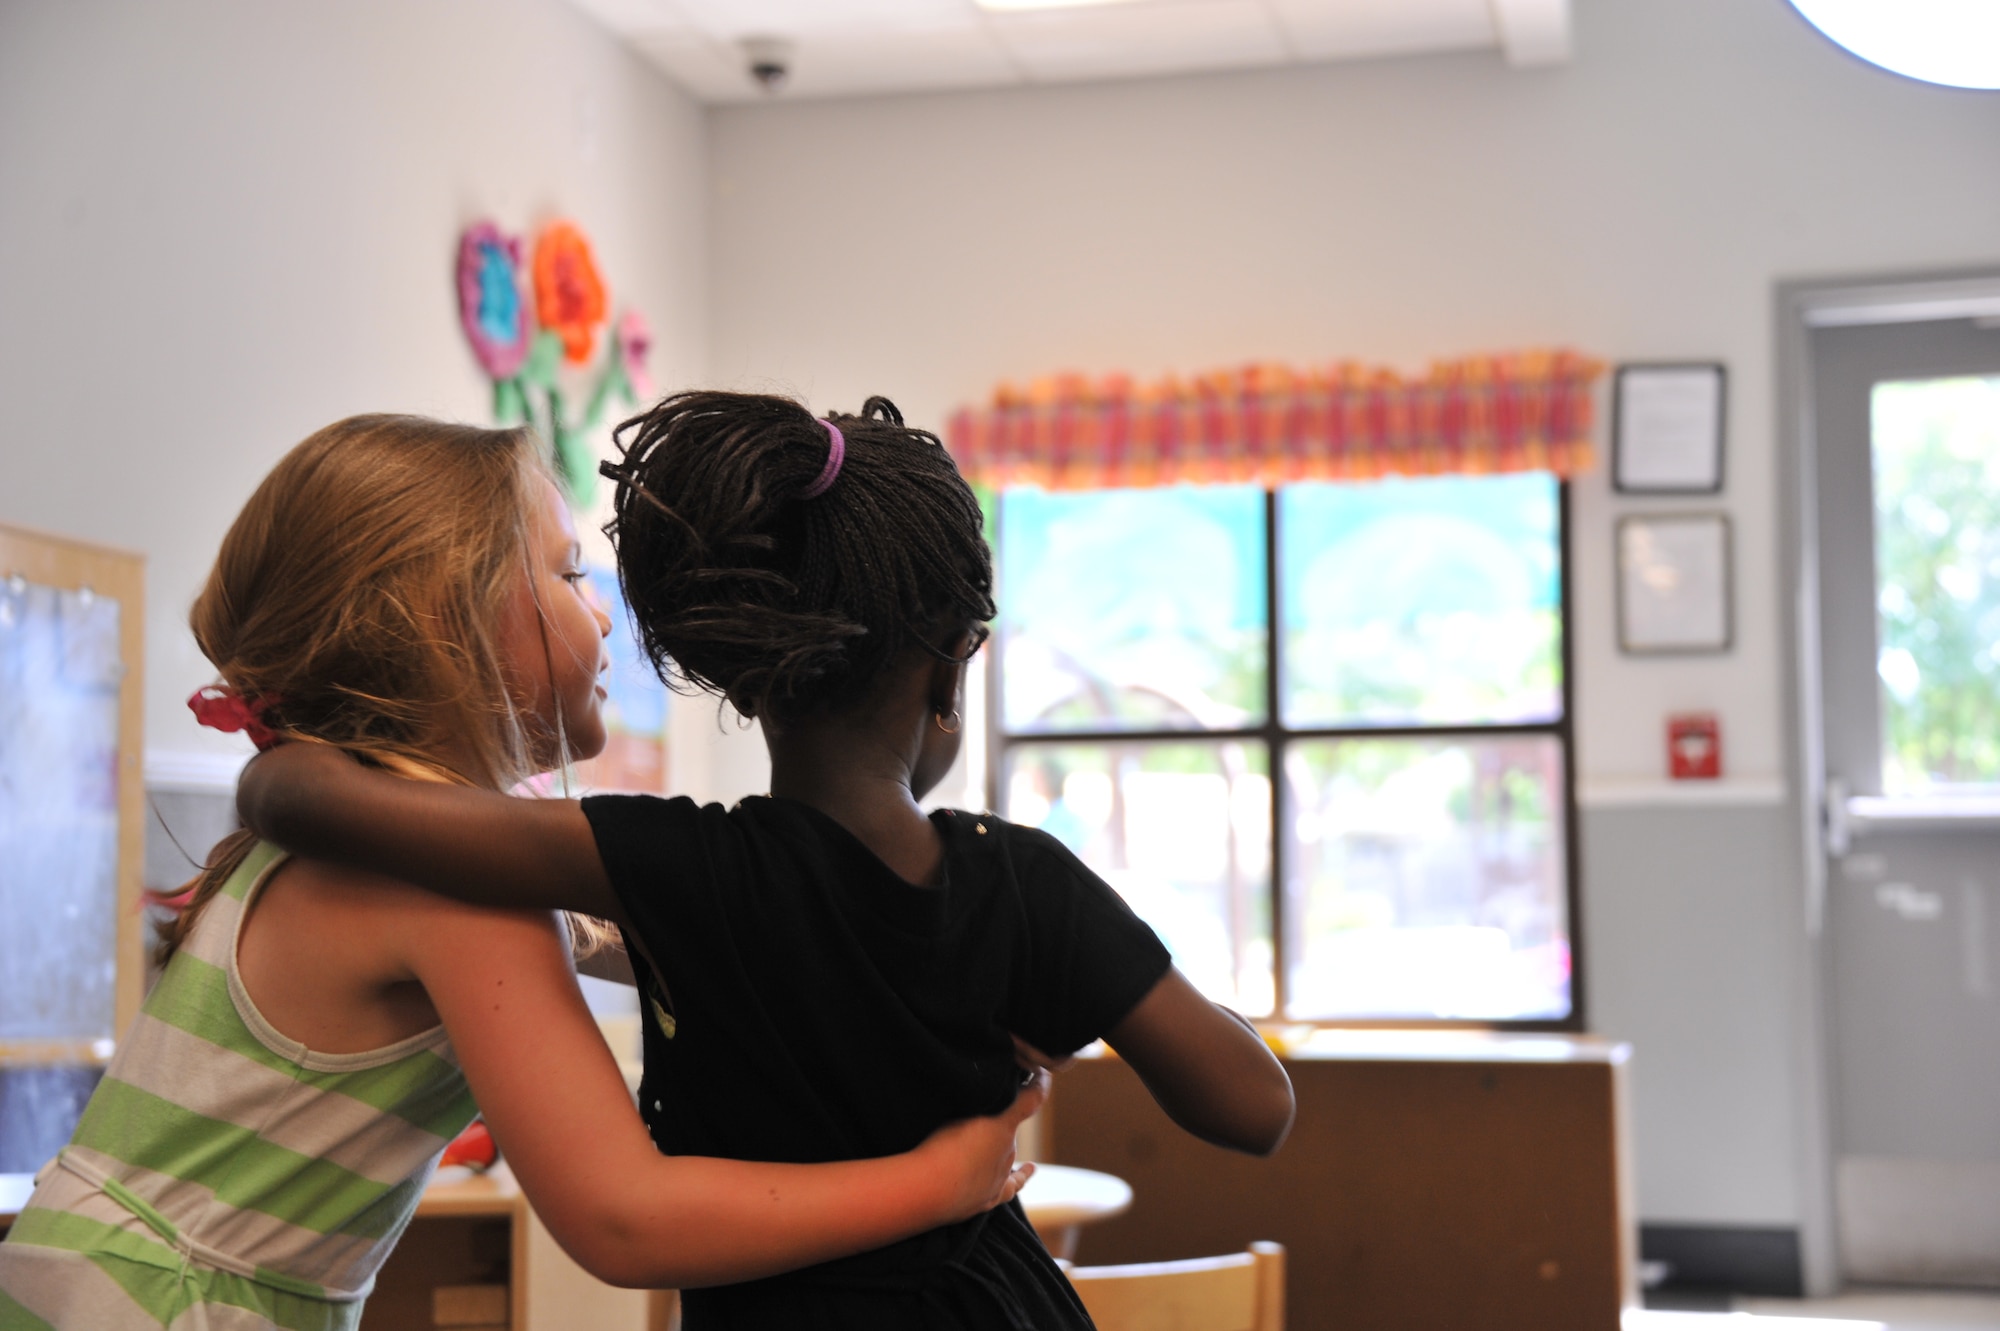 Sarah Caton, left, hugs her best friend Fatou Gueye, at the Maxwell Air Force Base child development center, May 20, 2014. Both girls are 4-year-old students at the center. When Fatou, who is from Senegal, first arrived to the CDC she did not speak English, and was unfamiliar with American customs. Thanks to Sarah, Fatou is now fluent in English and has adjusted to American practices. Many foreign students attend the Maxwell CDC as their parents go through officer schools at the Air University. (U.S. Air Force photo by Staff Sgt. Natasha Stannard)